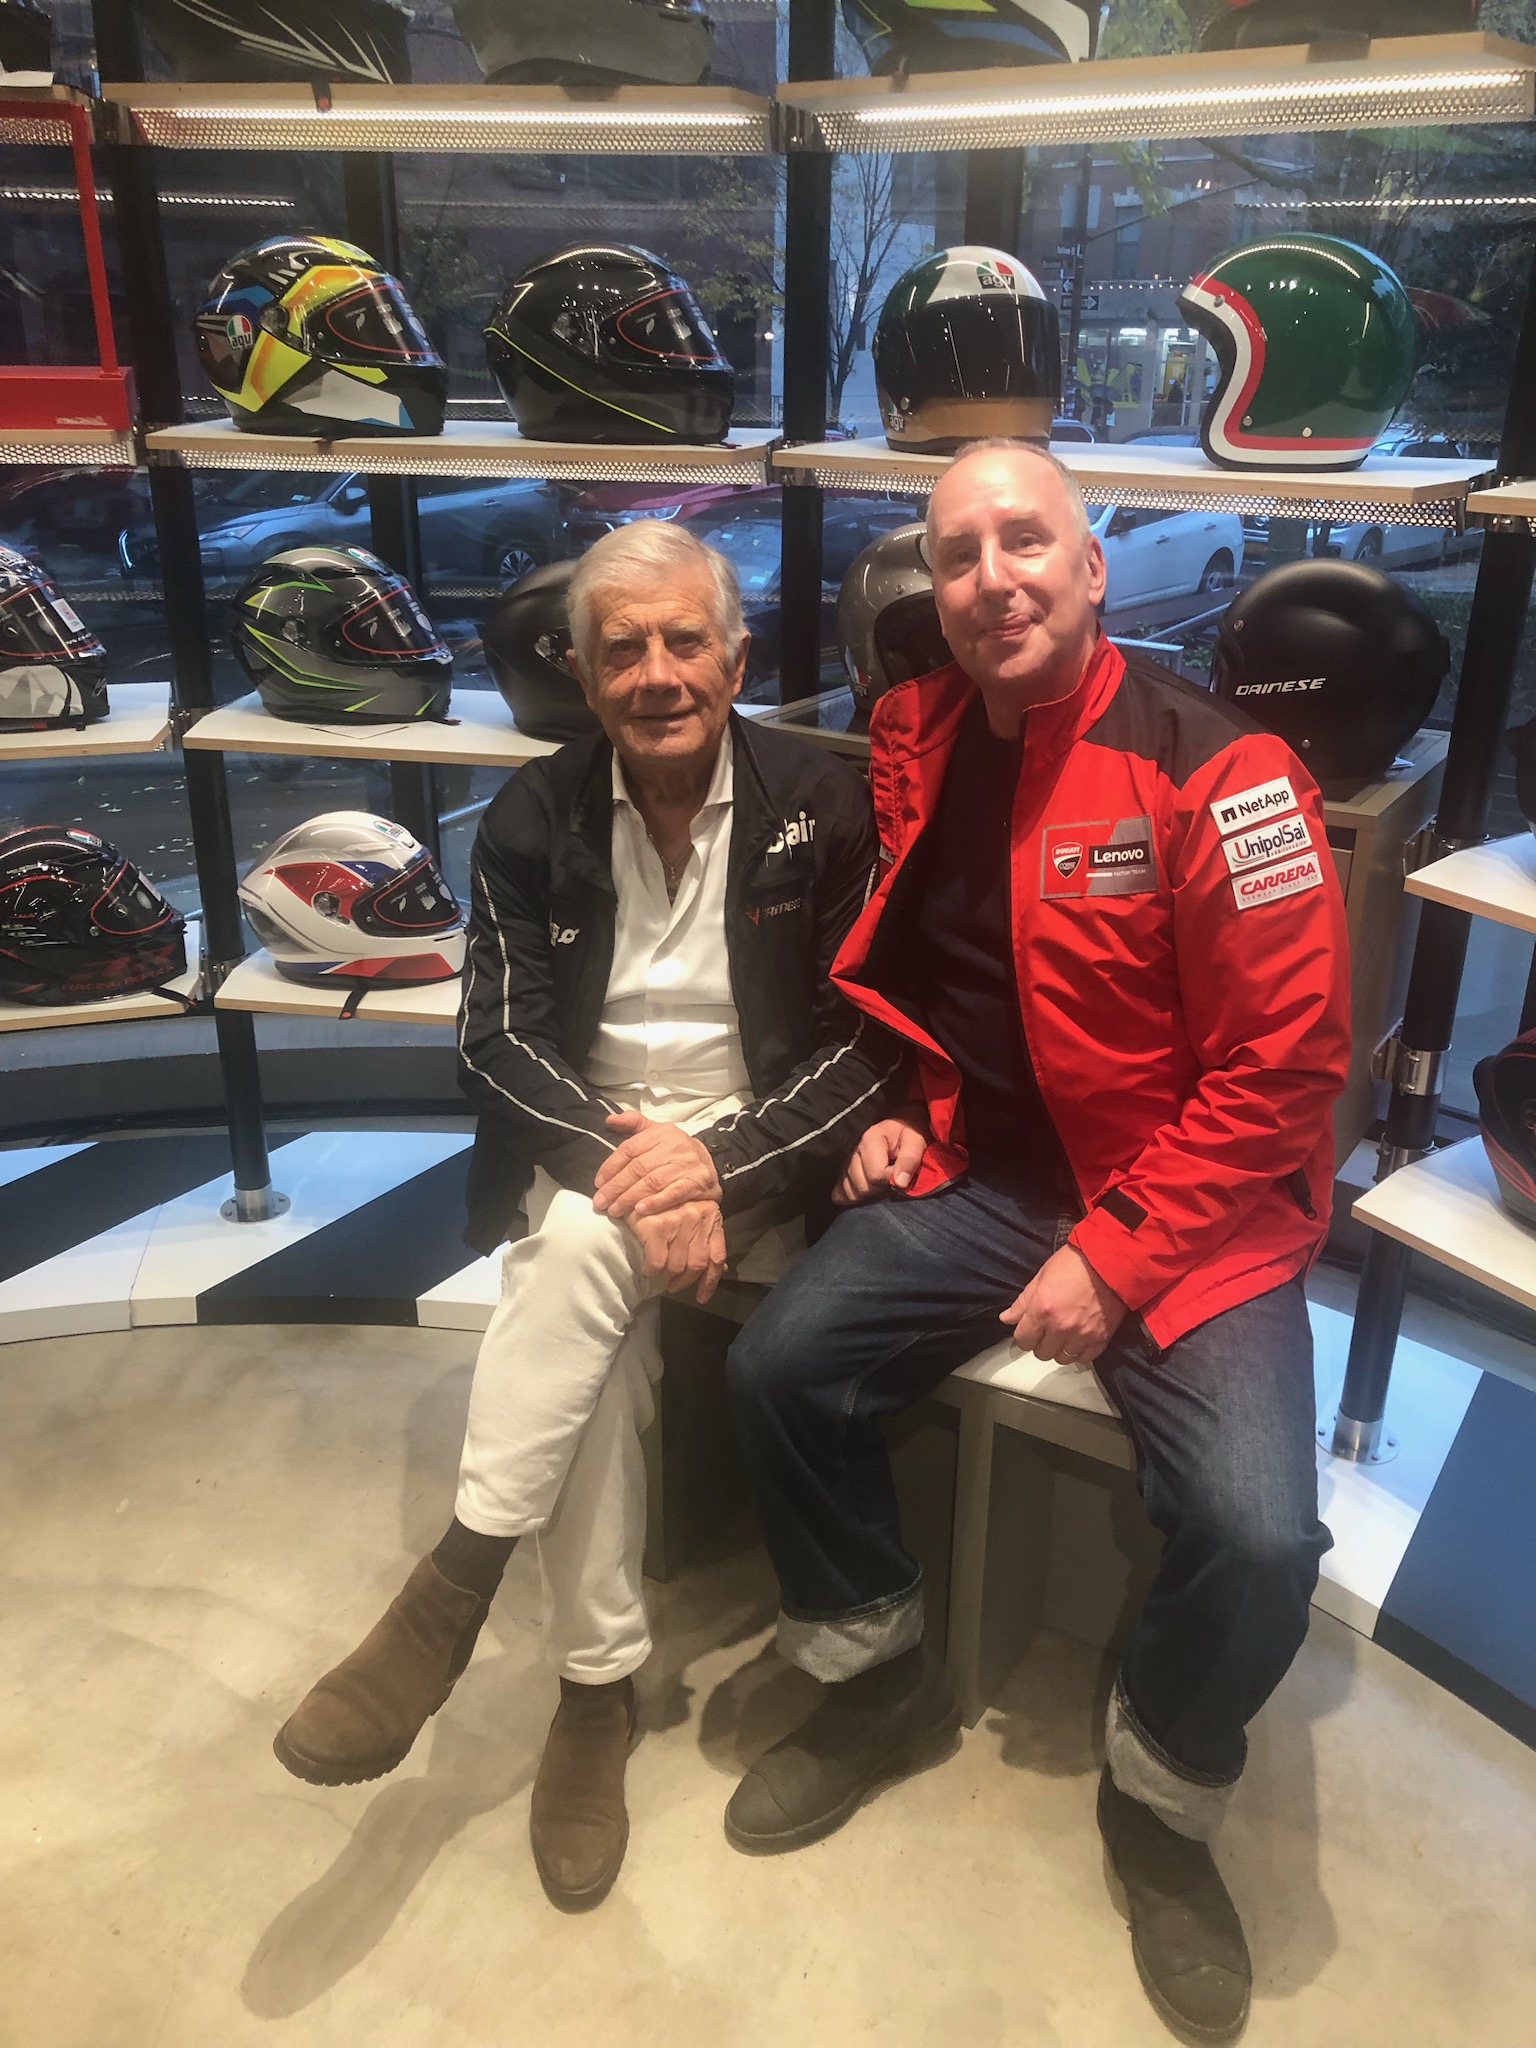 Corey Seymour with motorcycle-racing legend Giacomo Agostini at an event in Manhattan.